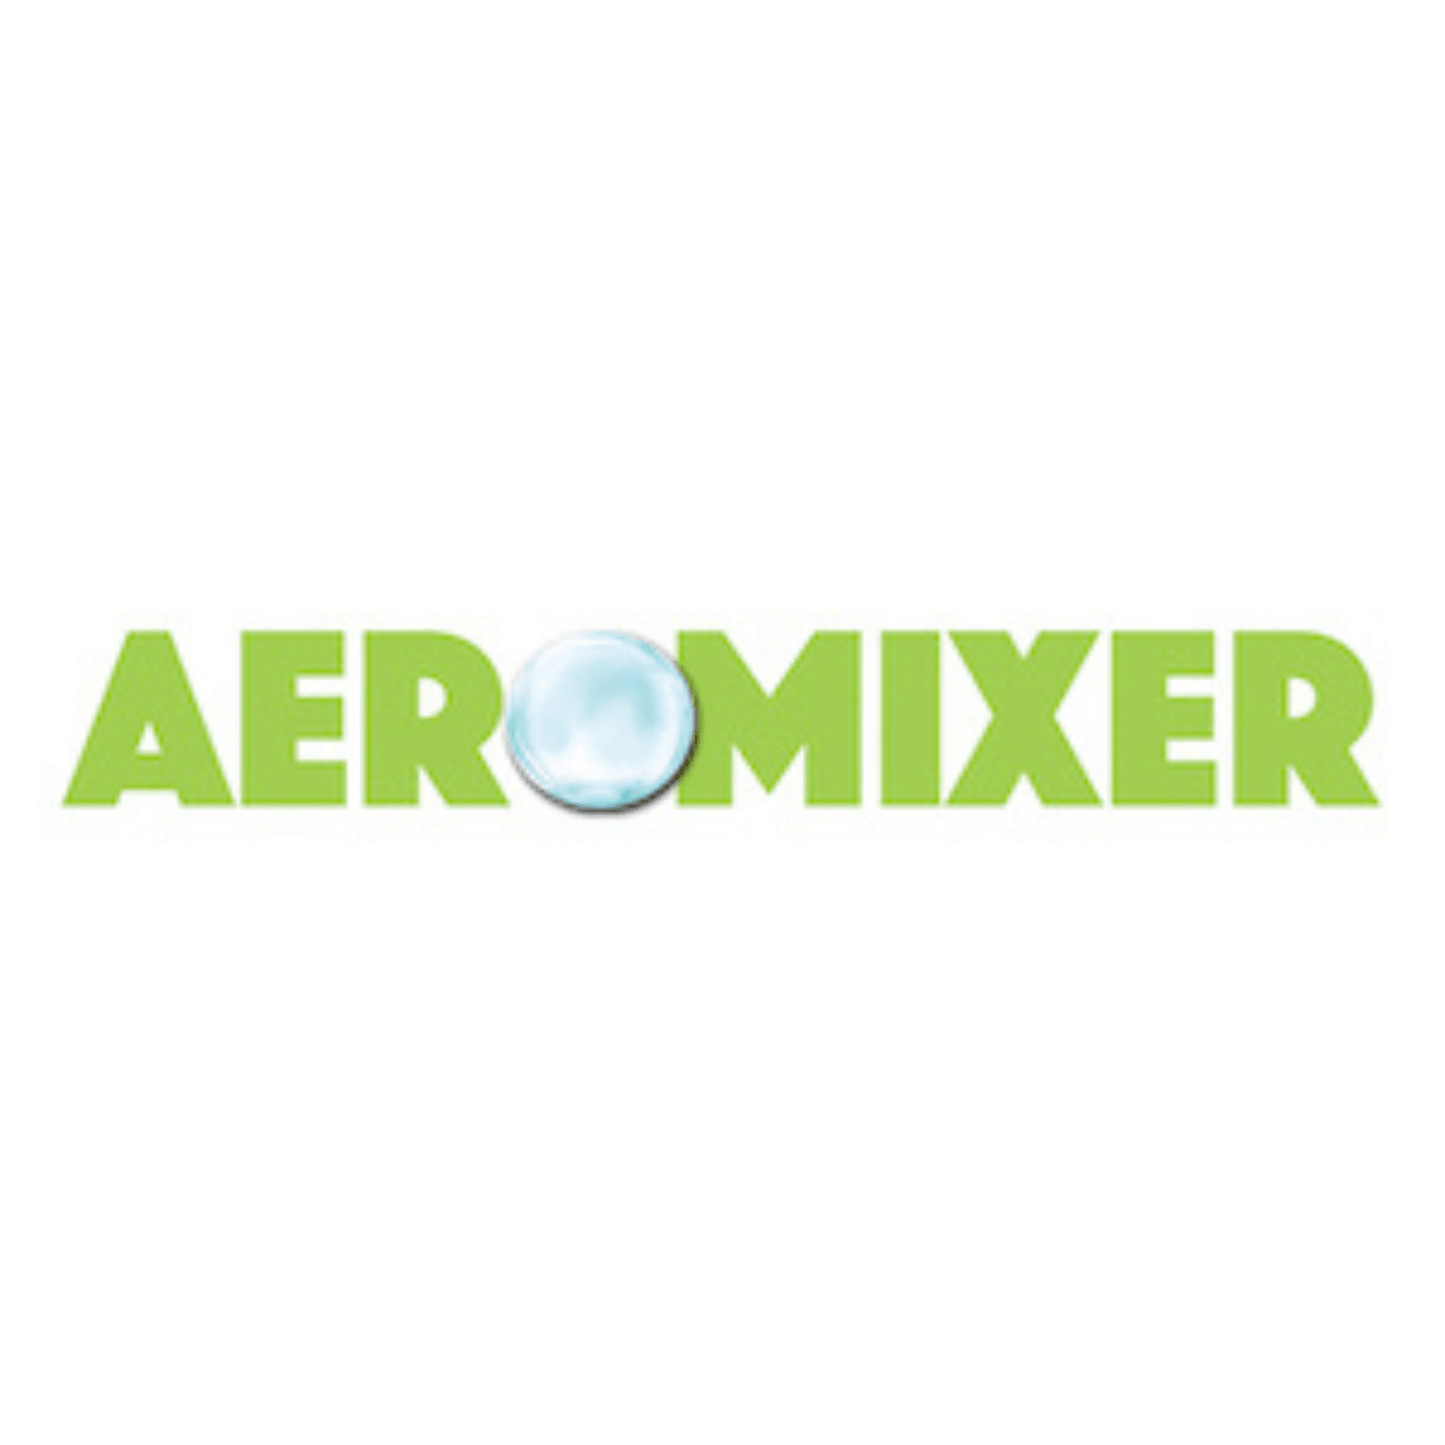 Aeromixer Aerobrewer All-In-One Controller AERO-BREWER Planting & Watering